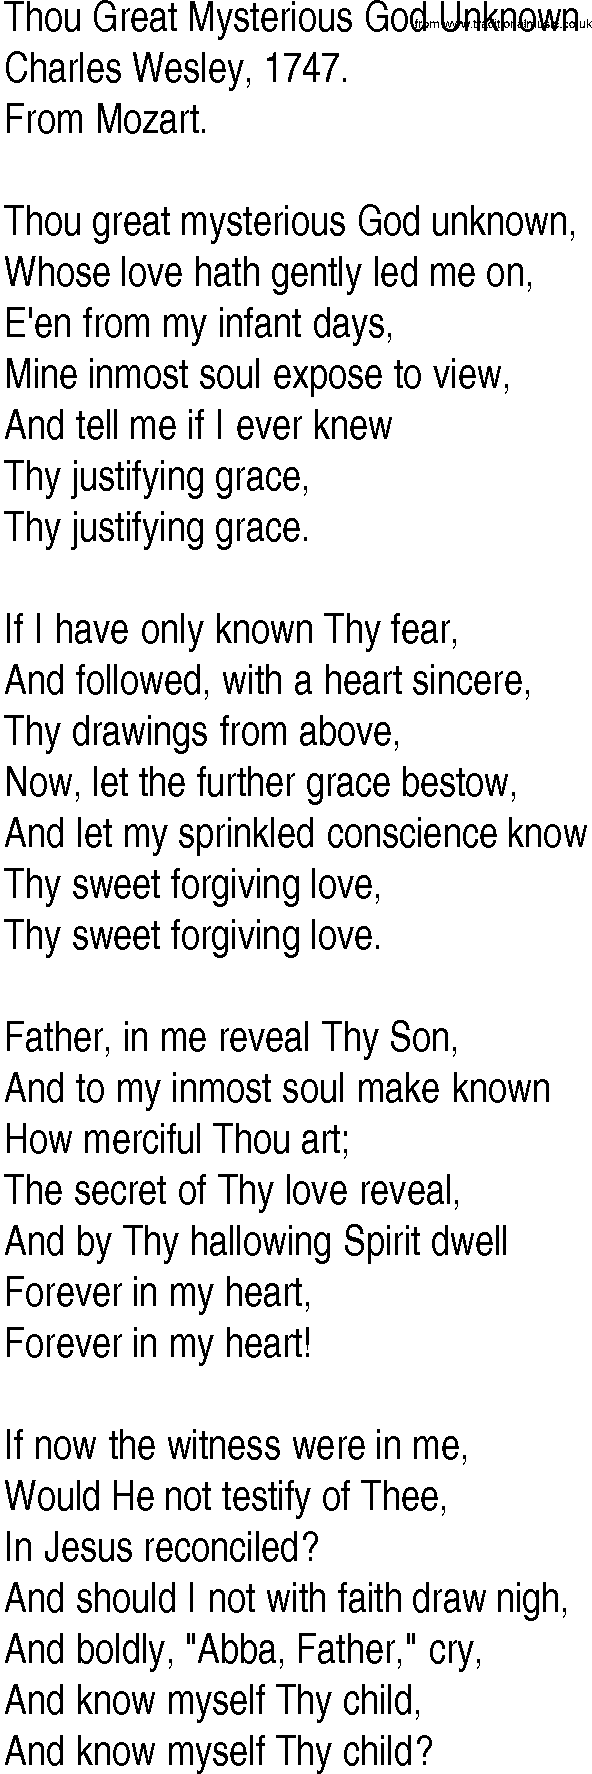 Hymn and Gospel Song: Thou Great Mysterious God Unknown by Charles Wesley lyrics